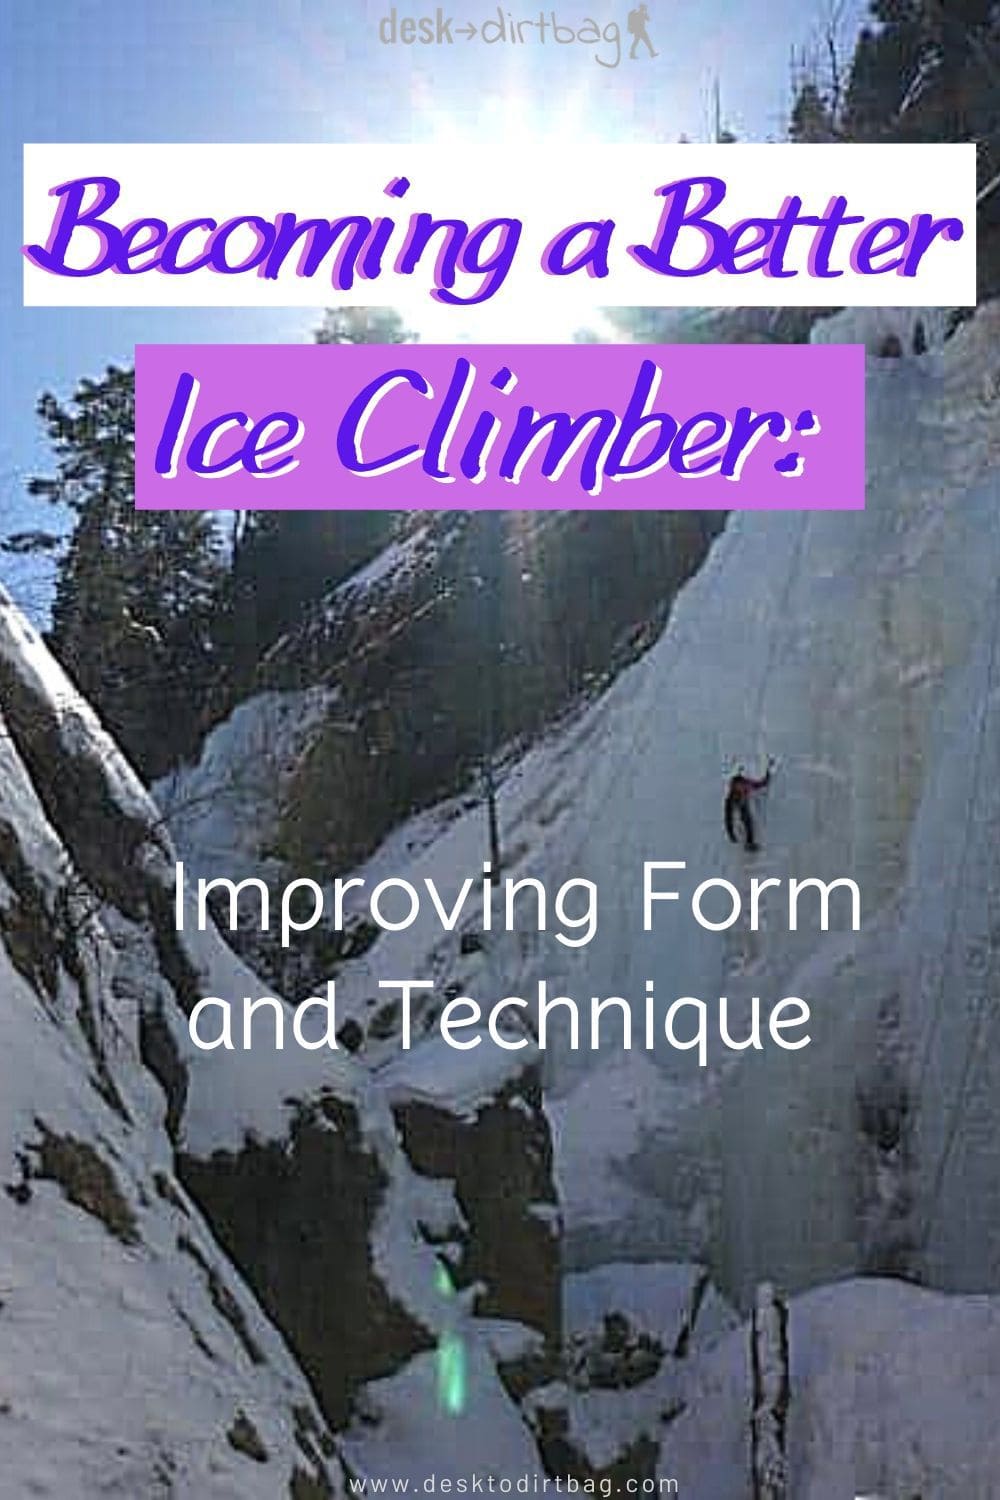 Becoming a Better Ice Climber: Improving Form and Technique trip-reports, instructional, ice-climbing